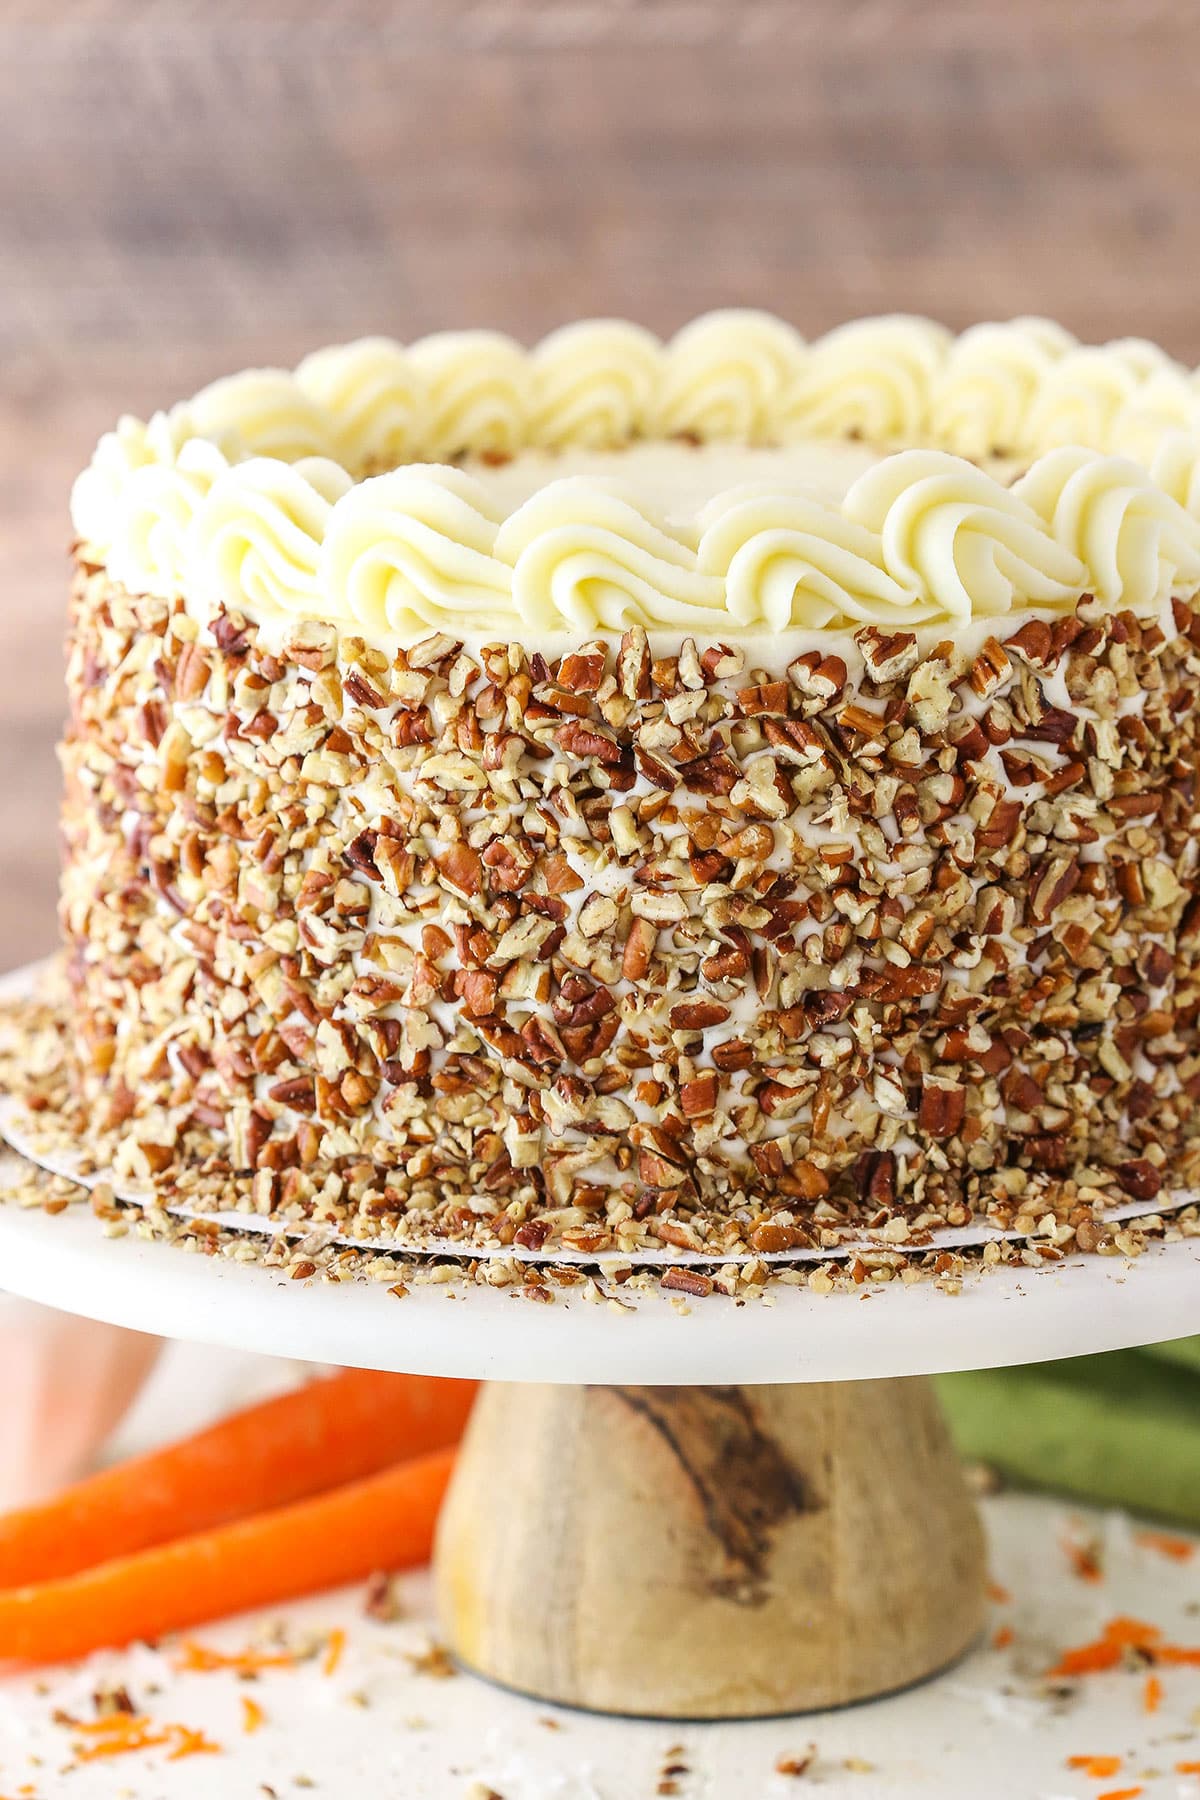 Side view of a full Carrot Cake on a white cake stand with a wooden base